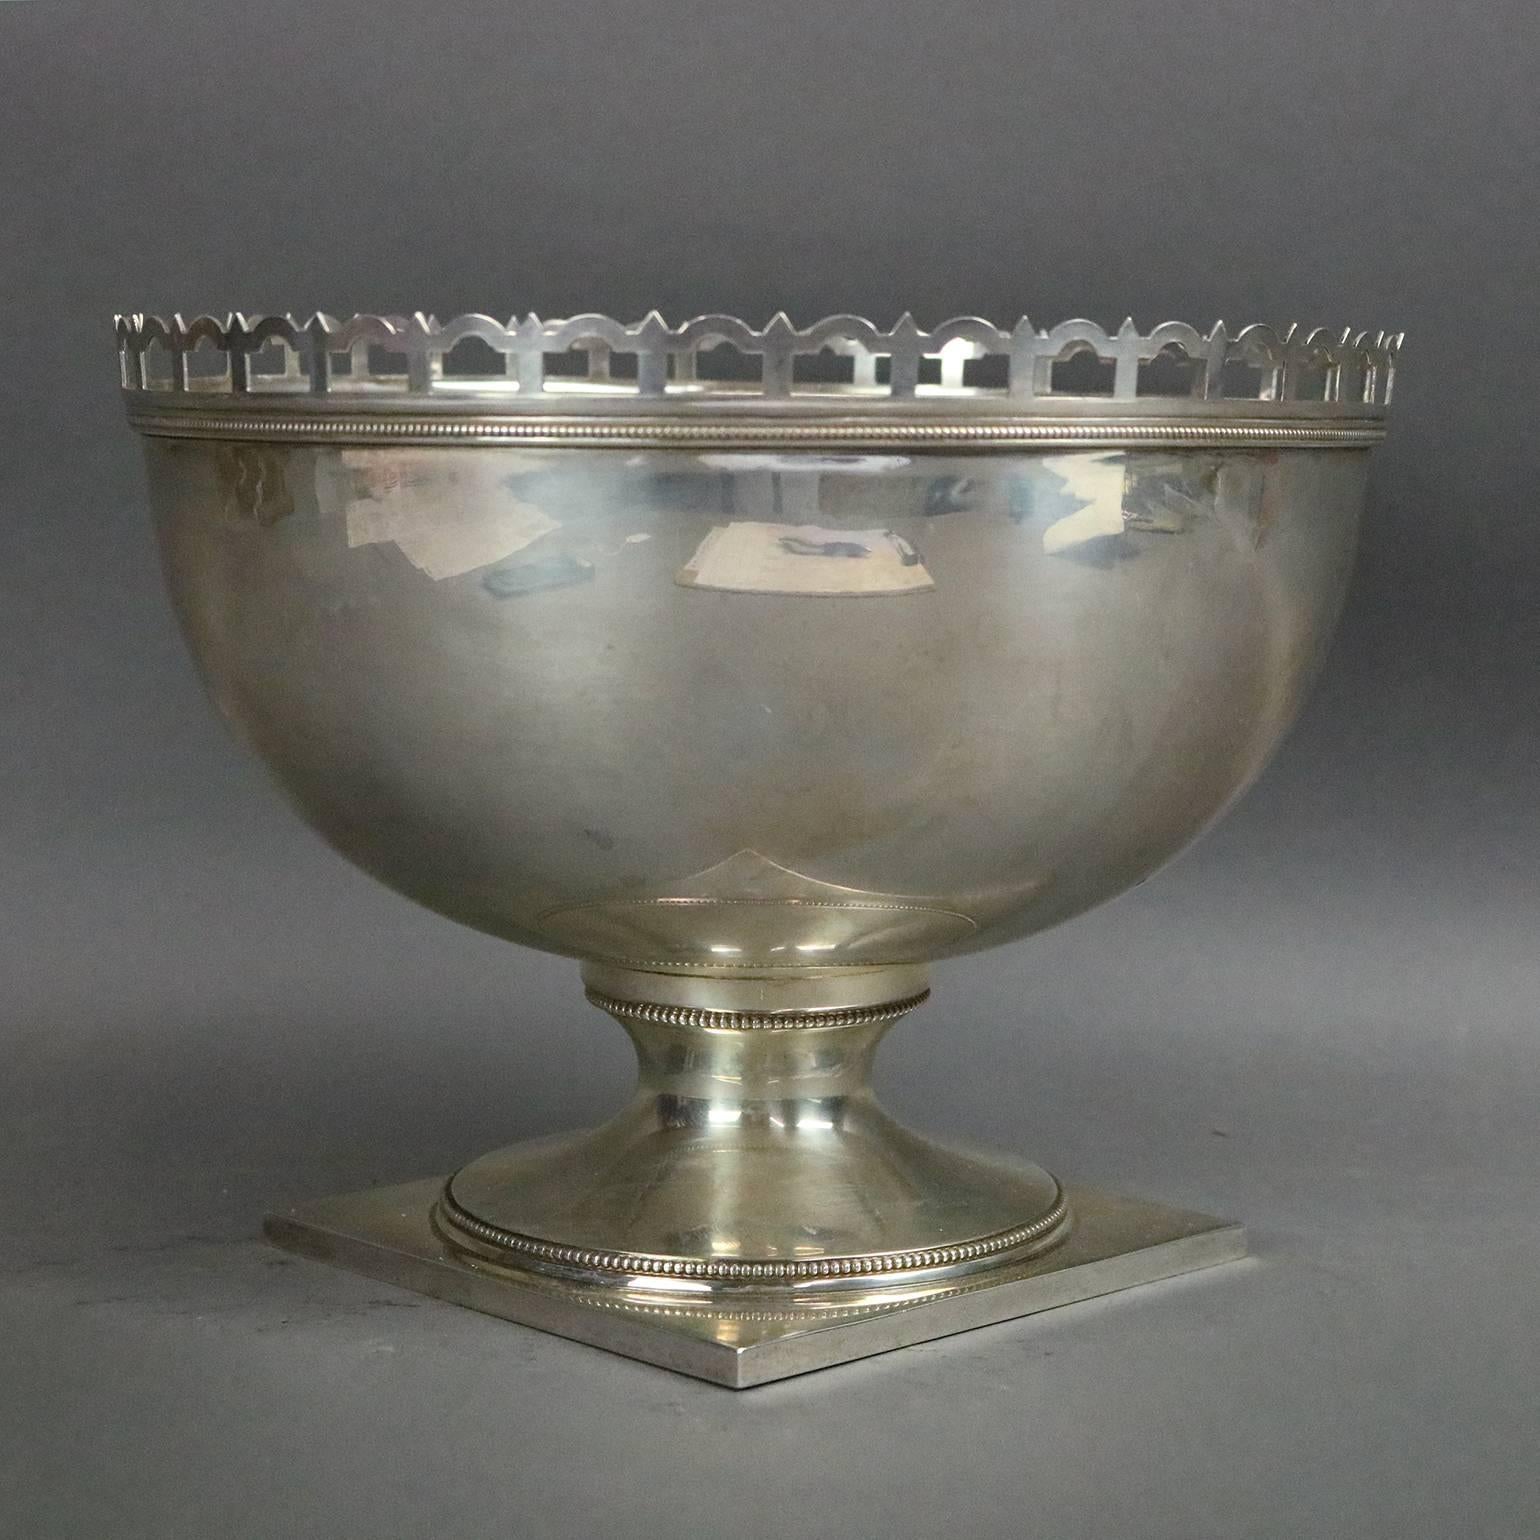 Antique sterling silver footed center bowl by J.E. Caldwell features pierced gallery rim and beaded edge decoration, 19th century.

Measures: 6.75" H x 8.75" diameter 5" x 5" base.